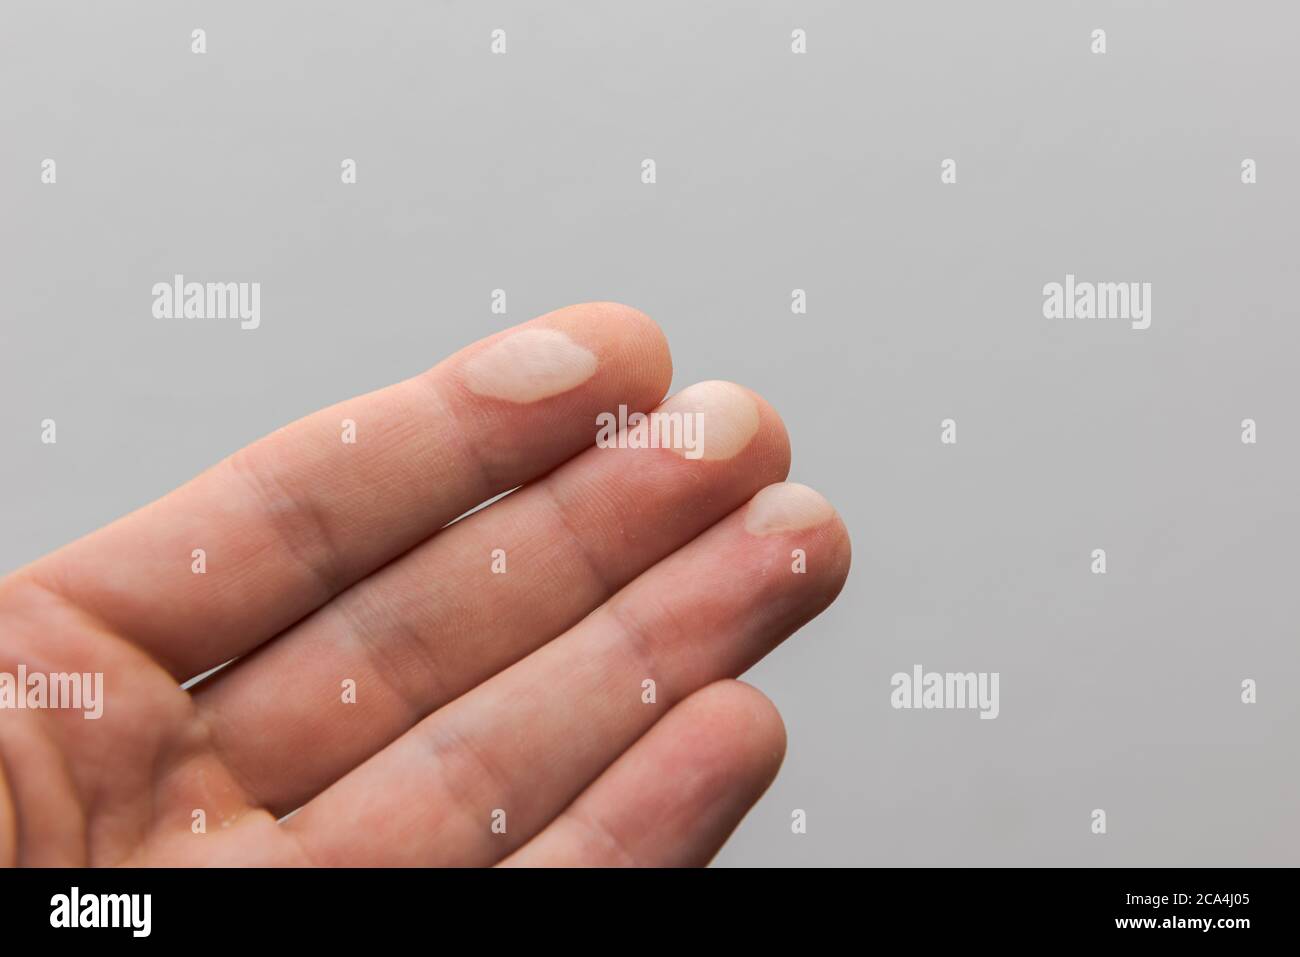 Human hand with painful blisters on three fingertips from touching hot pan isolated on white background Stock Photo